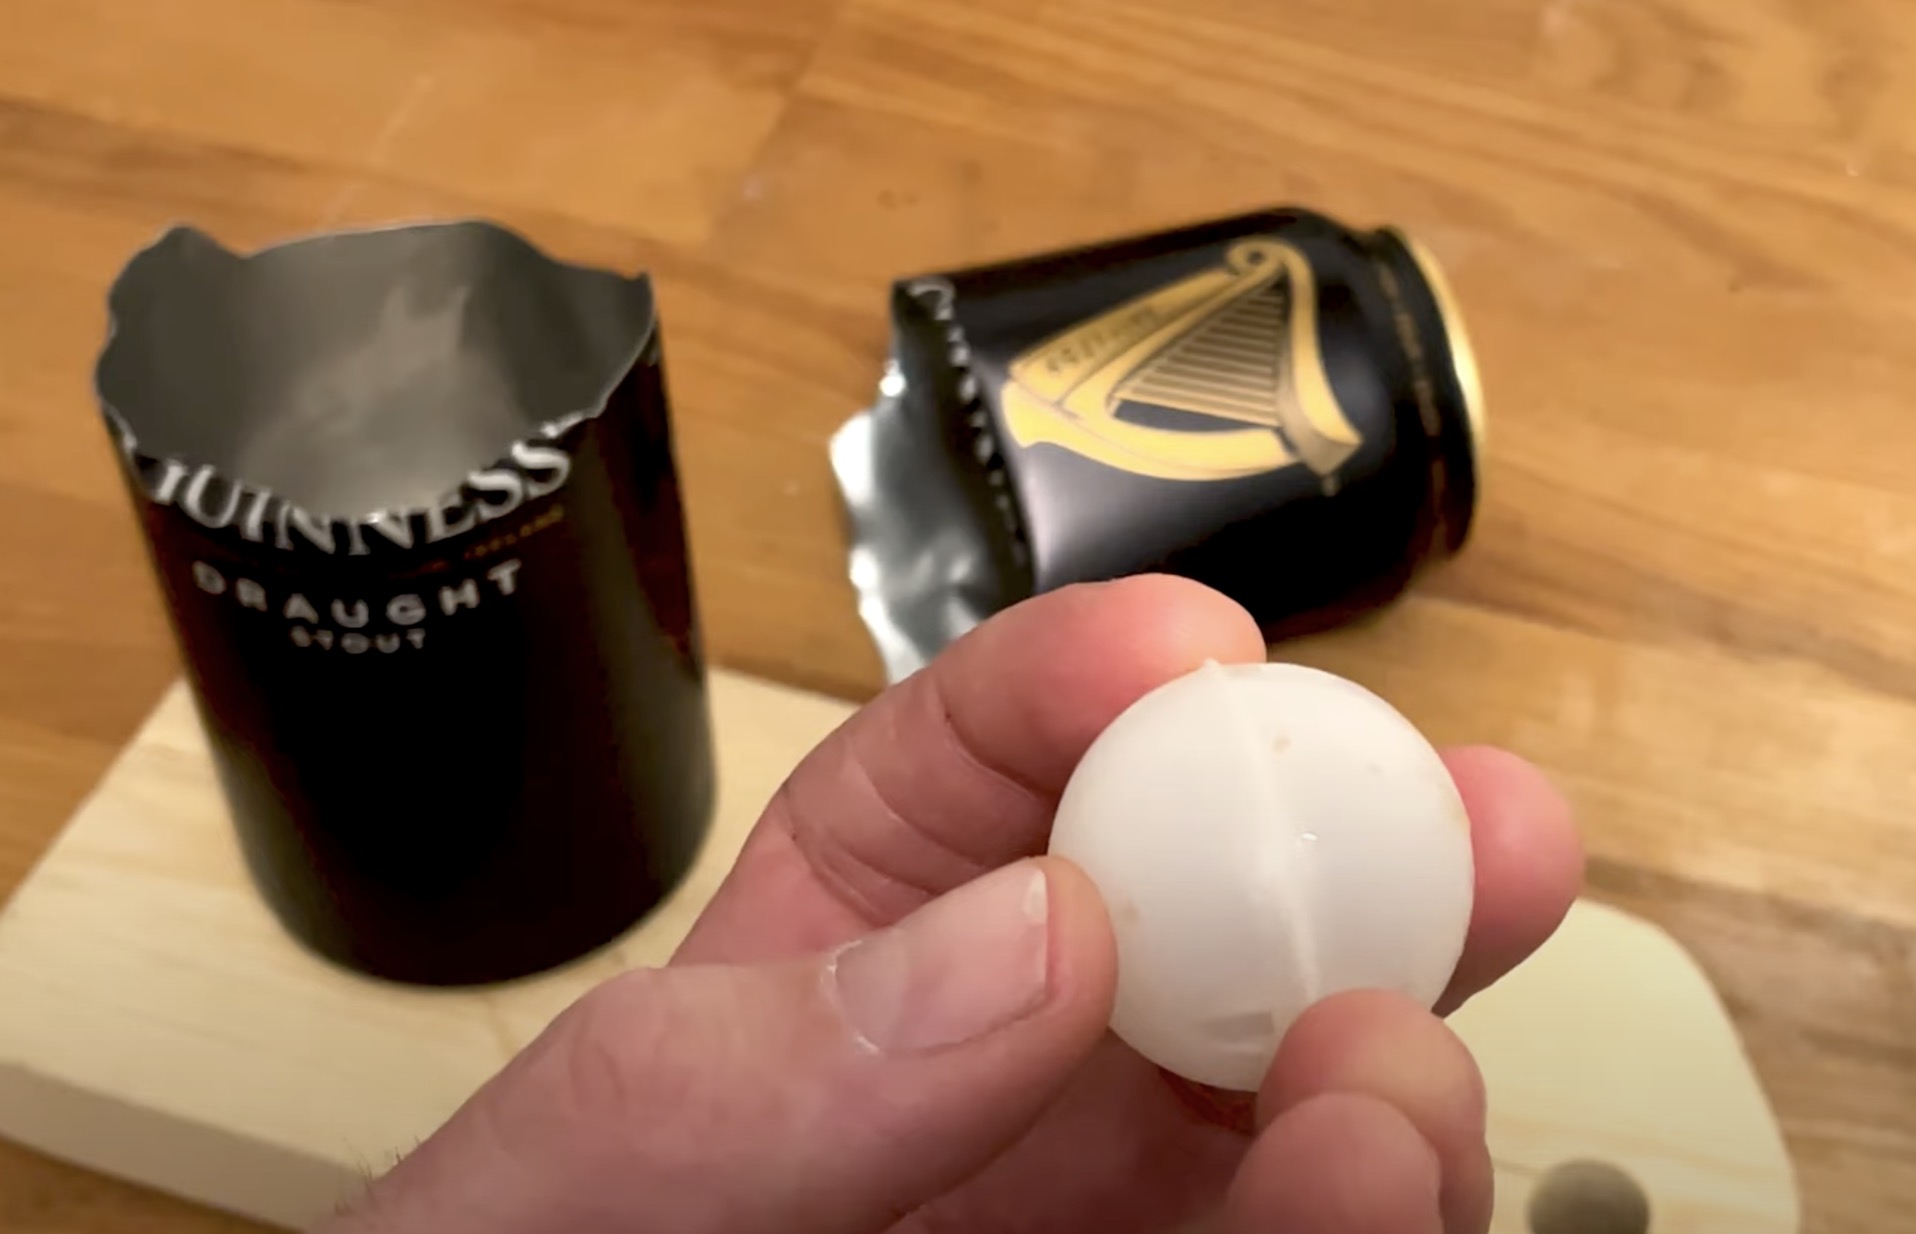 Why Is There A Plastic Ball In Guinness Beer Cans?